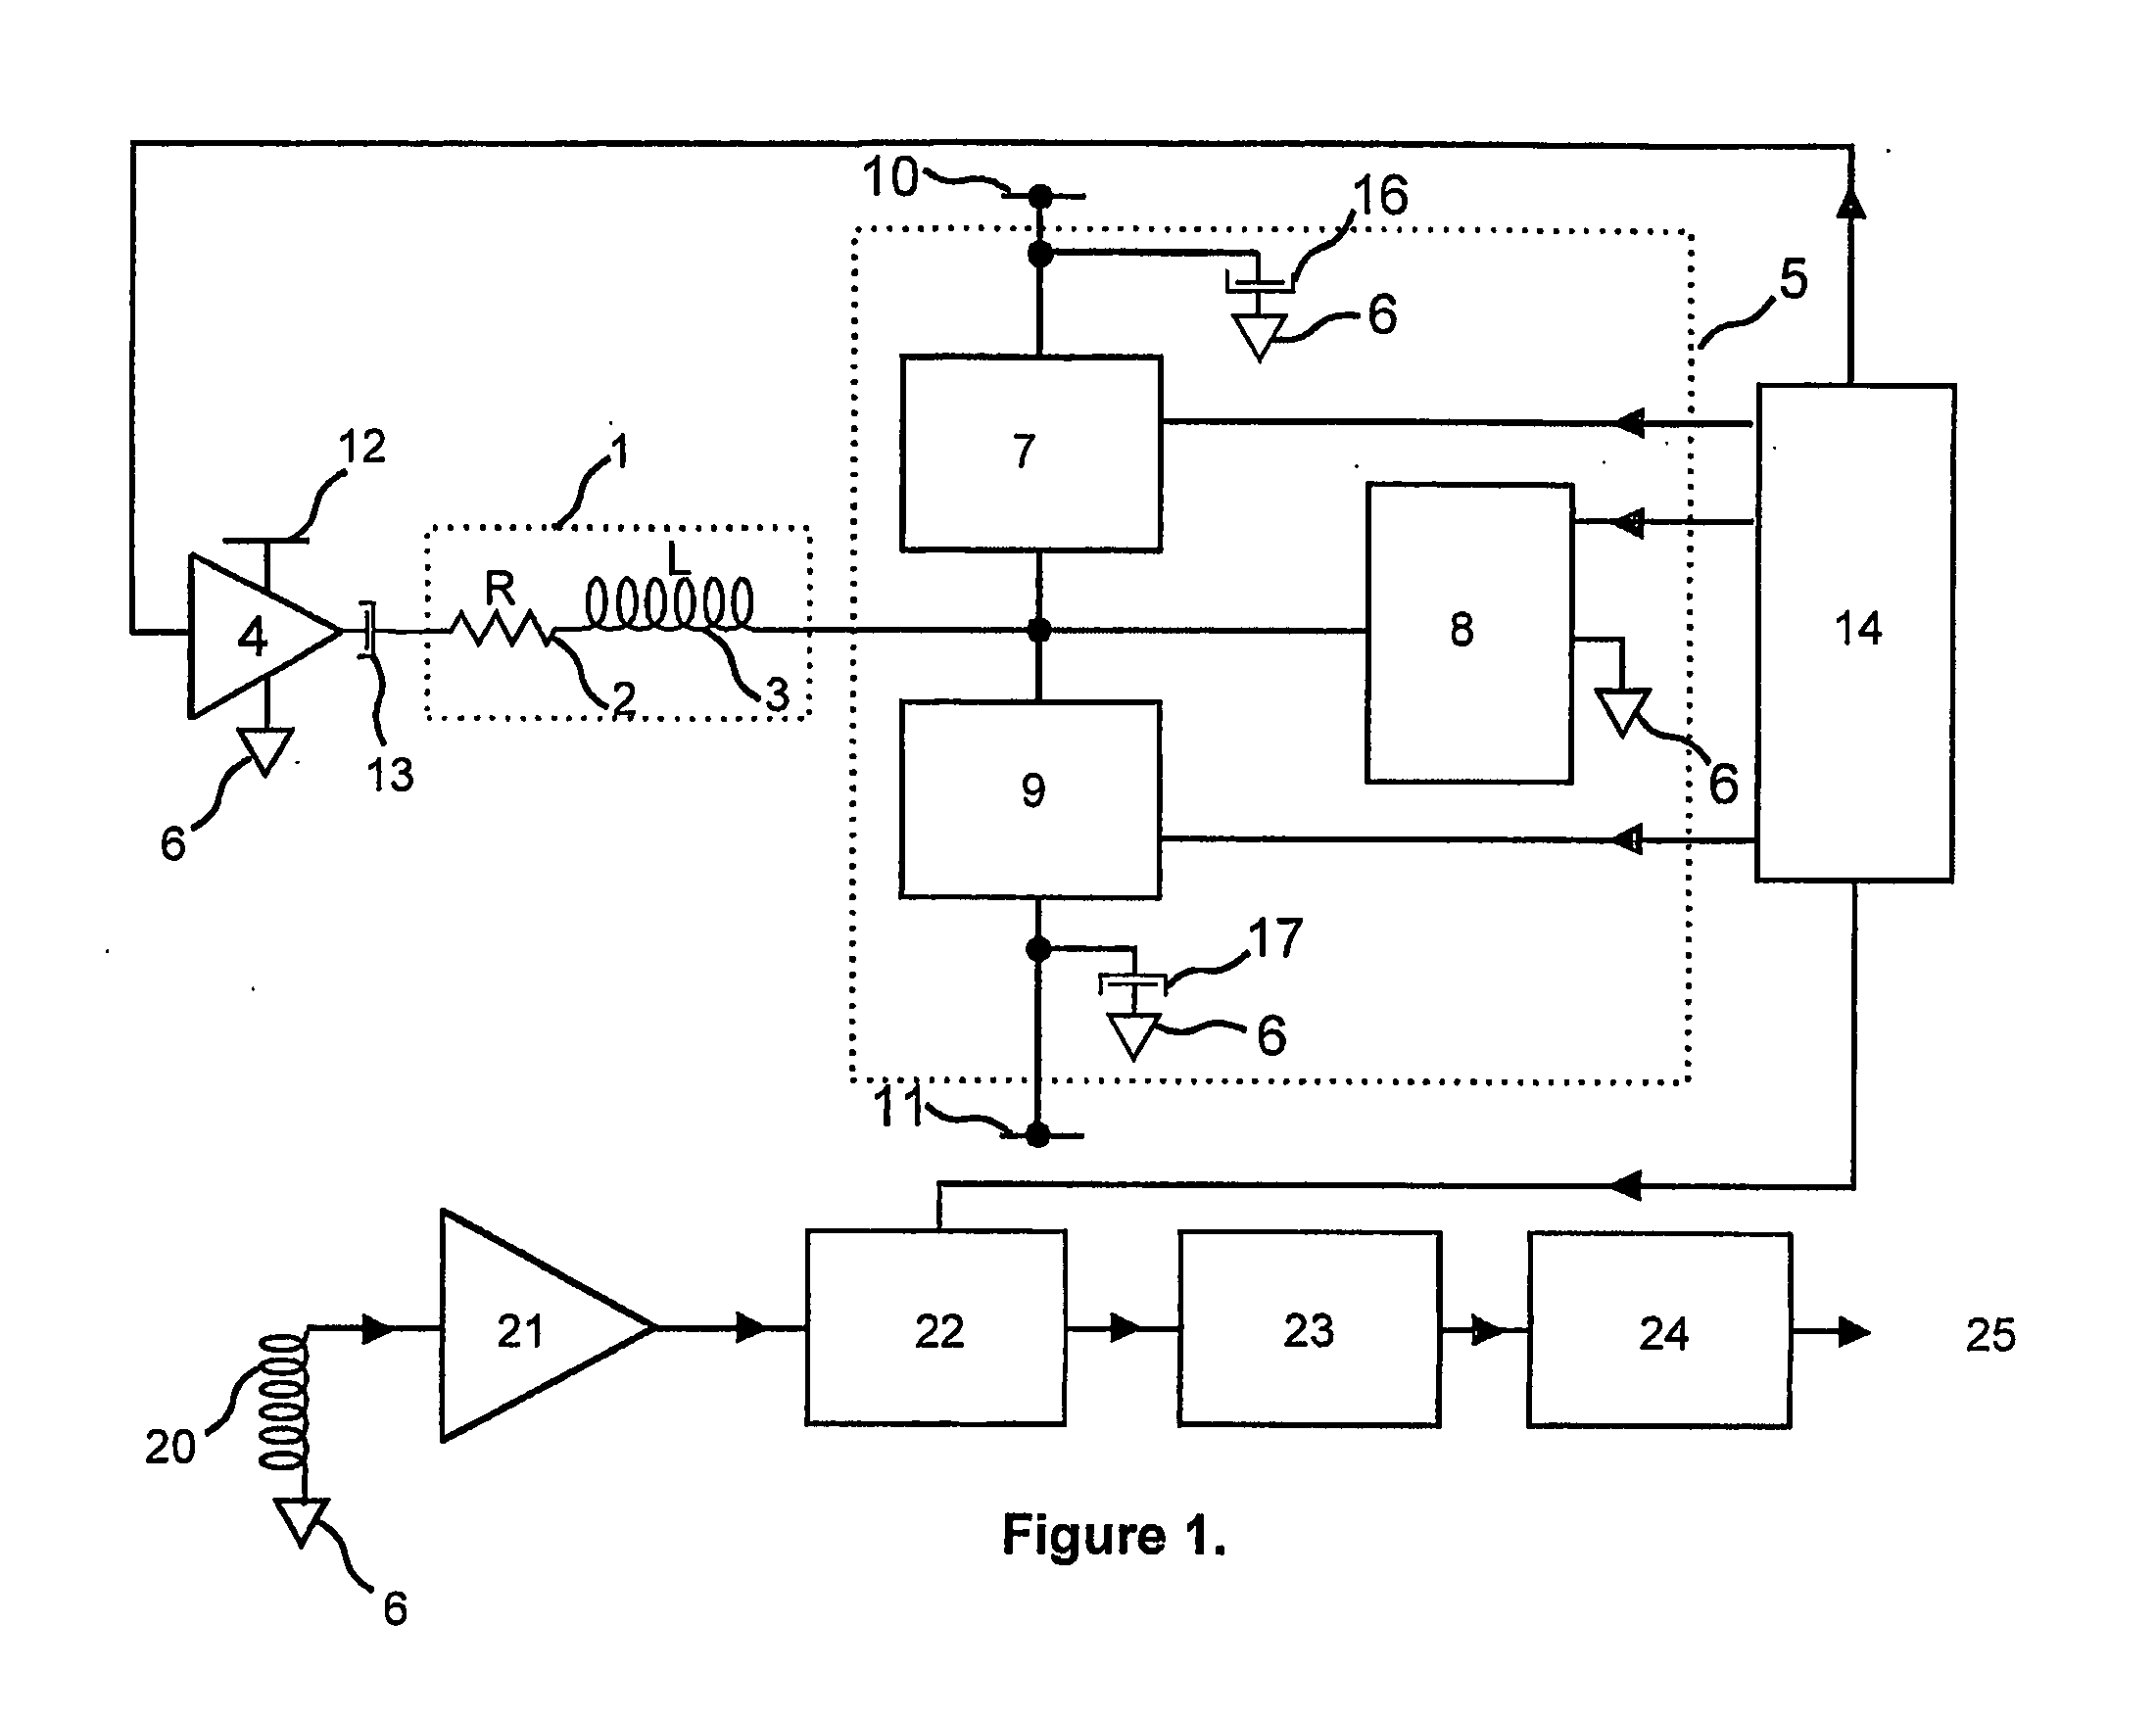 Multi-Frequency Metal Detector Having Constant Reactive Transmit Voltage Applied To A Transmit Coil